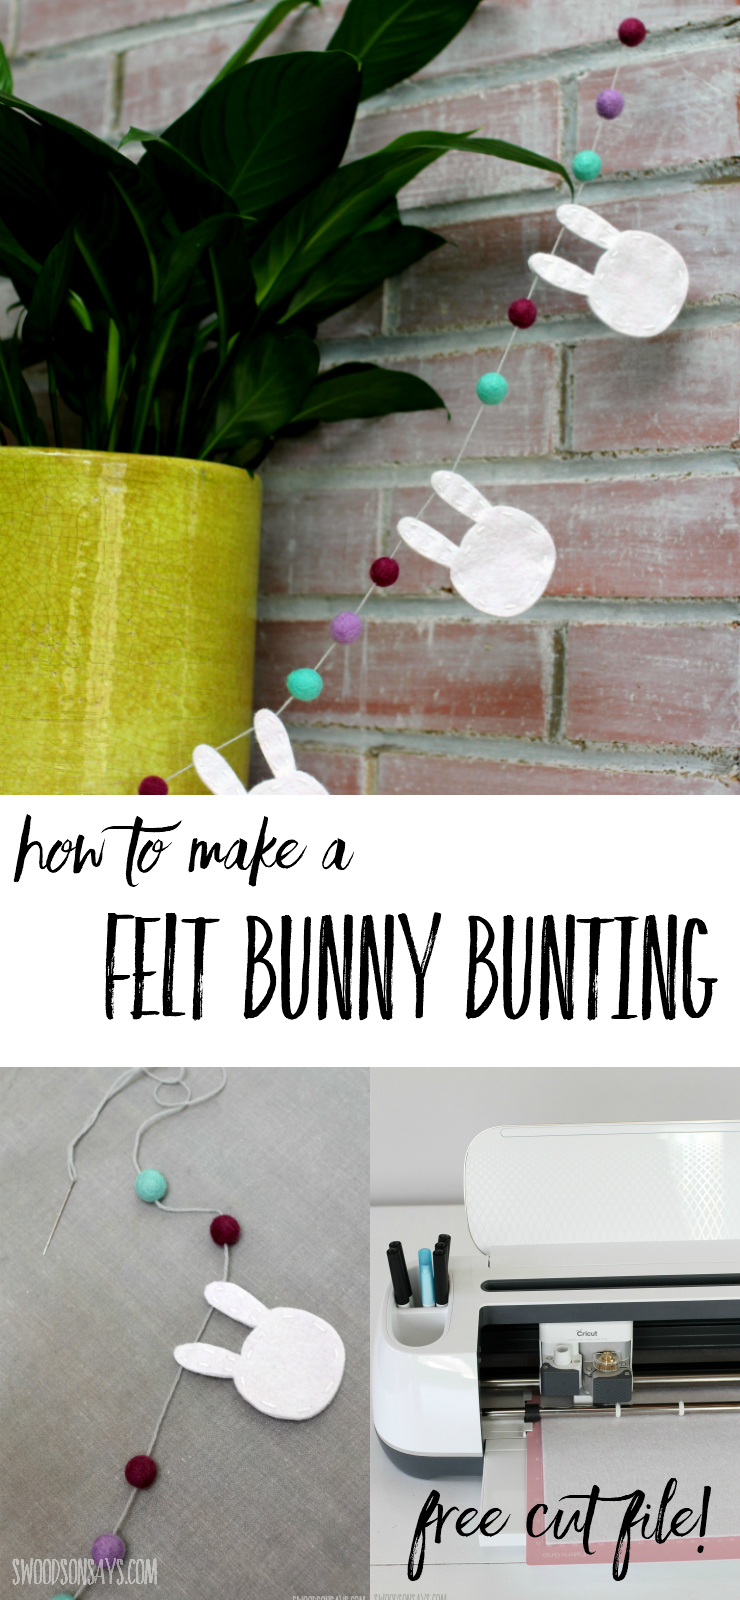 See how to make a felt bunny bunting for Easter! This shows off the capabilities of the Cricut Maker machine so you don't have to cut anything by hand. It is a fun Easter craft for adults to make diy felt Easter decorations. #SewCricut #CricutMade #ad 